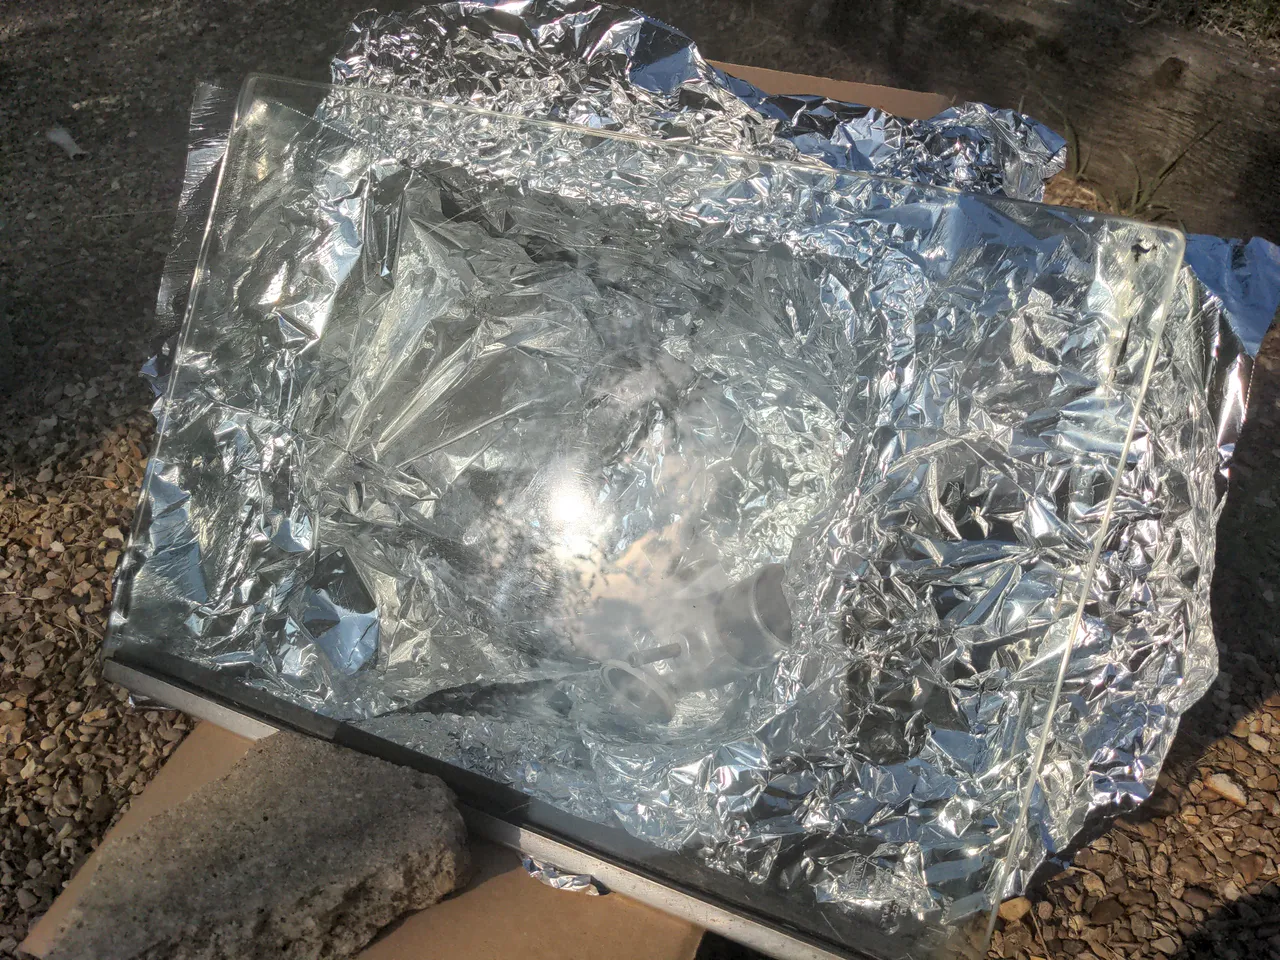 My pipe baking in a home-made solar oven; it is a cardboard box lined with foil and a sheet of Land Rover glass over it. A reflection of the sun shows that it is a very sunny day.